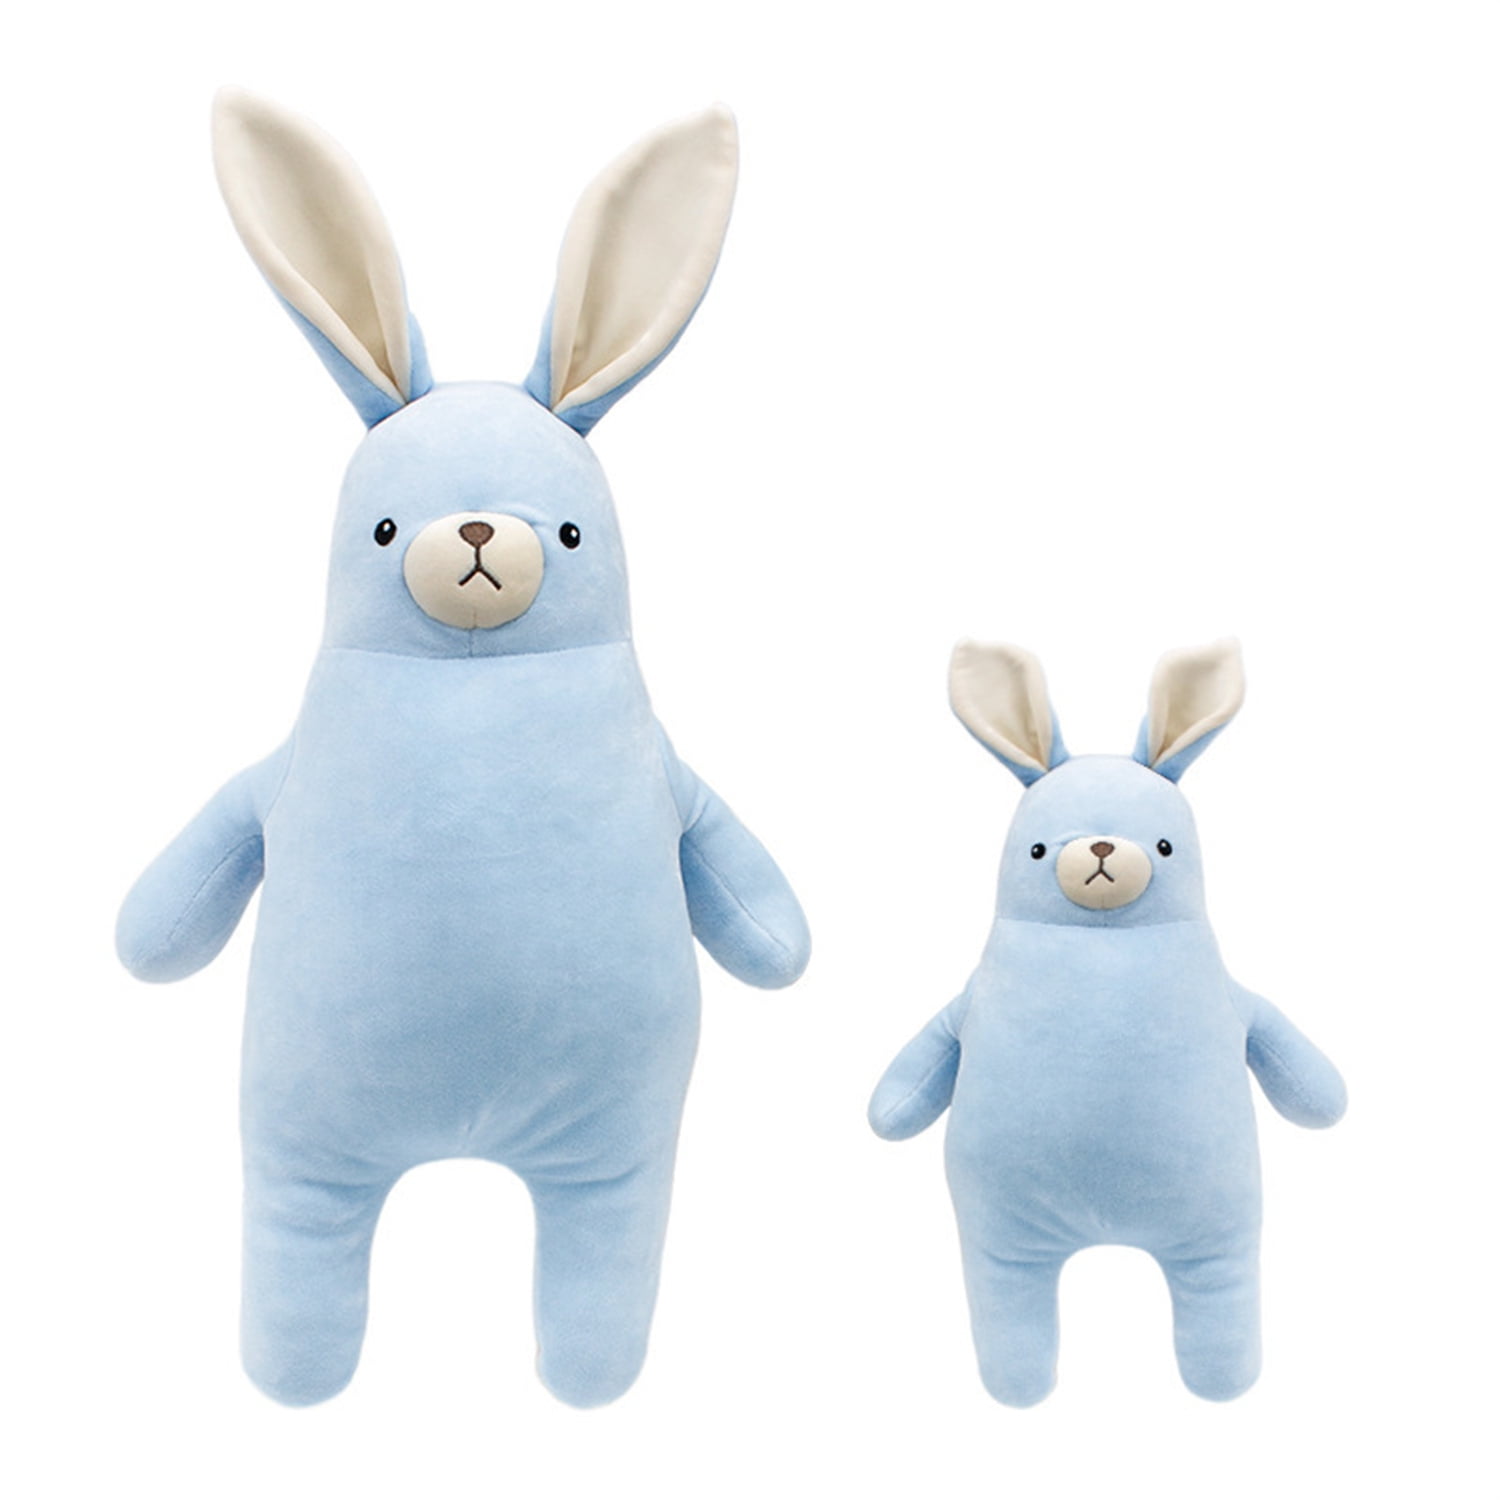 New Limited Edition Peep's Chocolate Dipped & Scented Bunny Plush Stuffed  Animals-Blue Bunny - Plush Toys, Facebook Marketplace